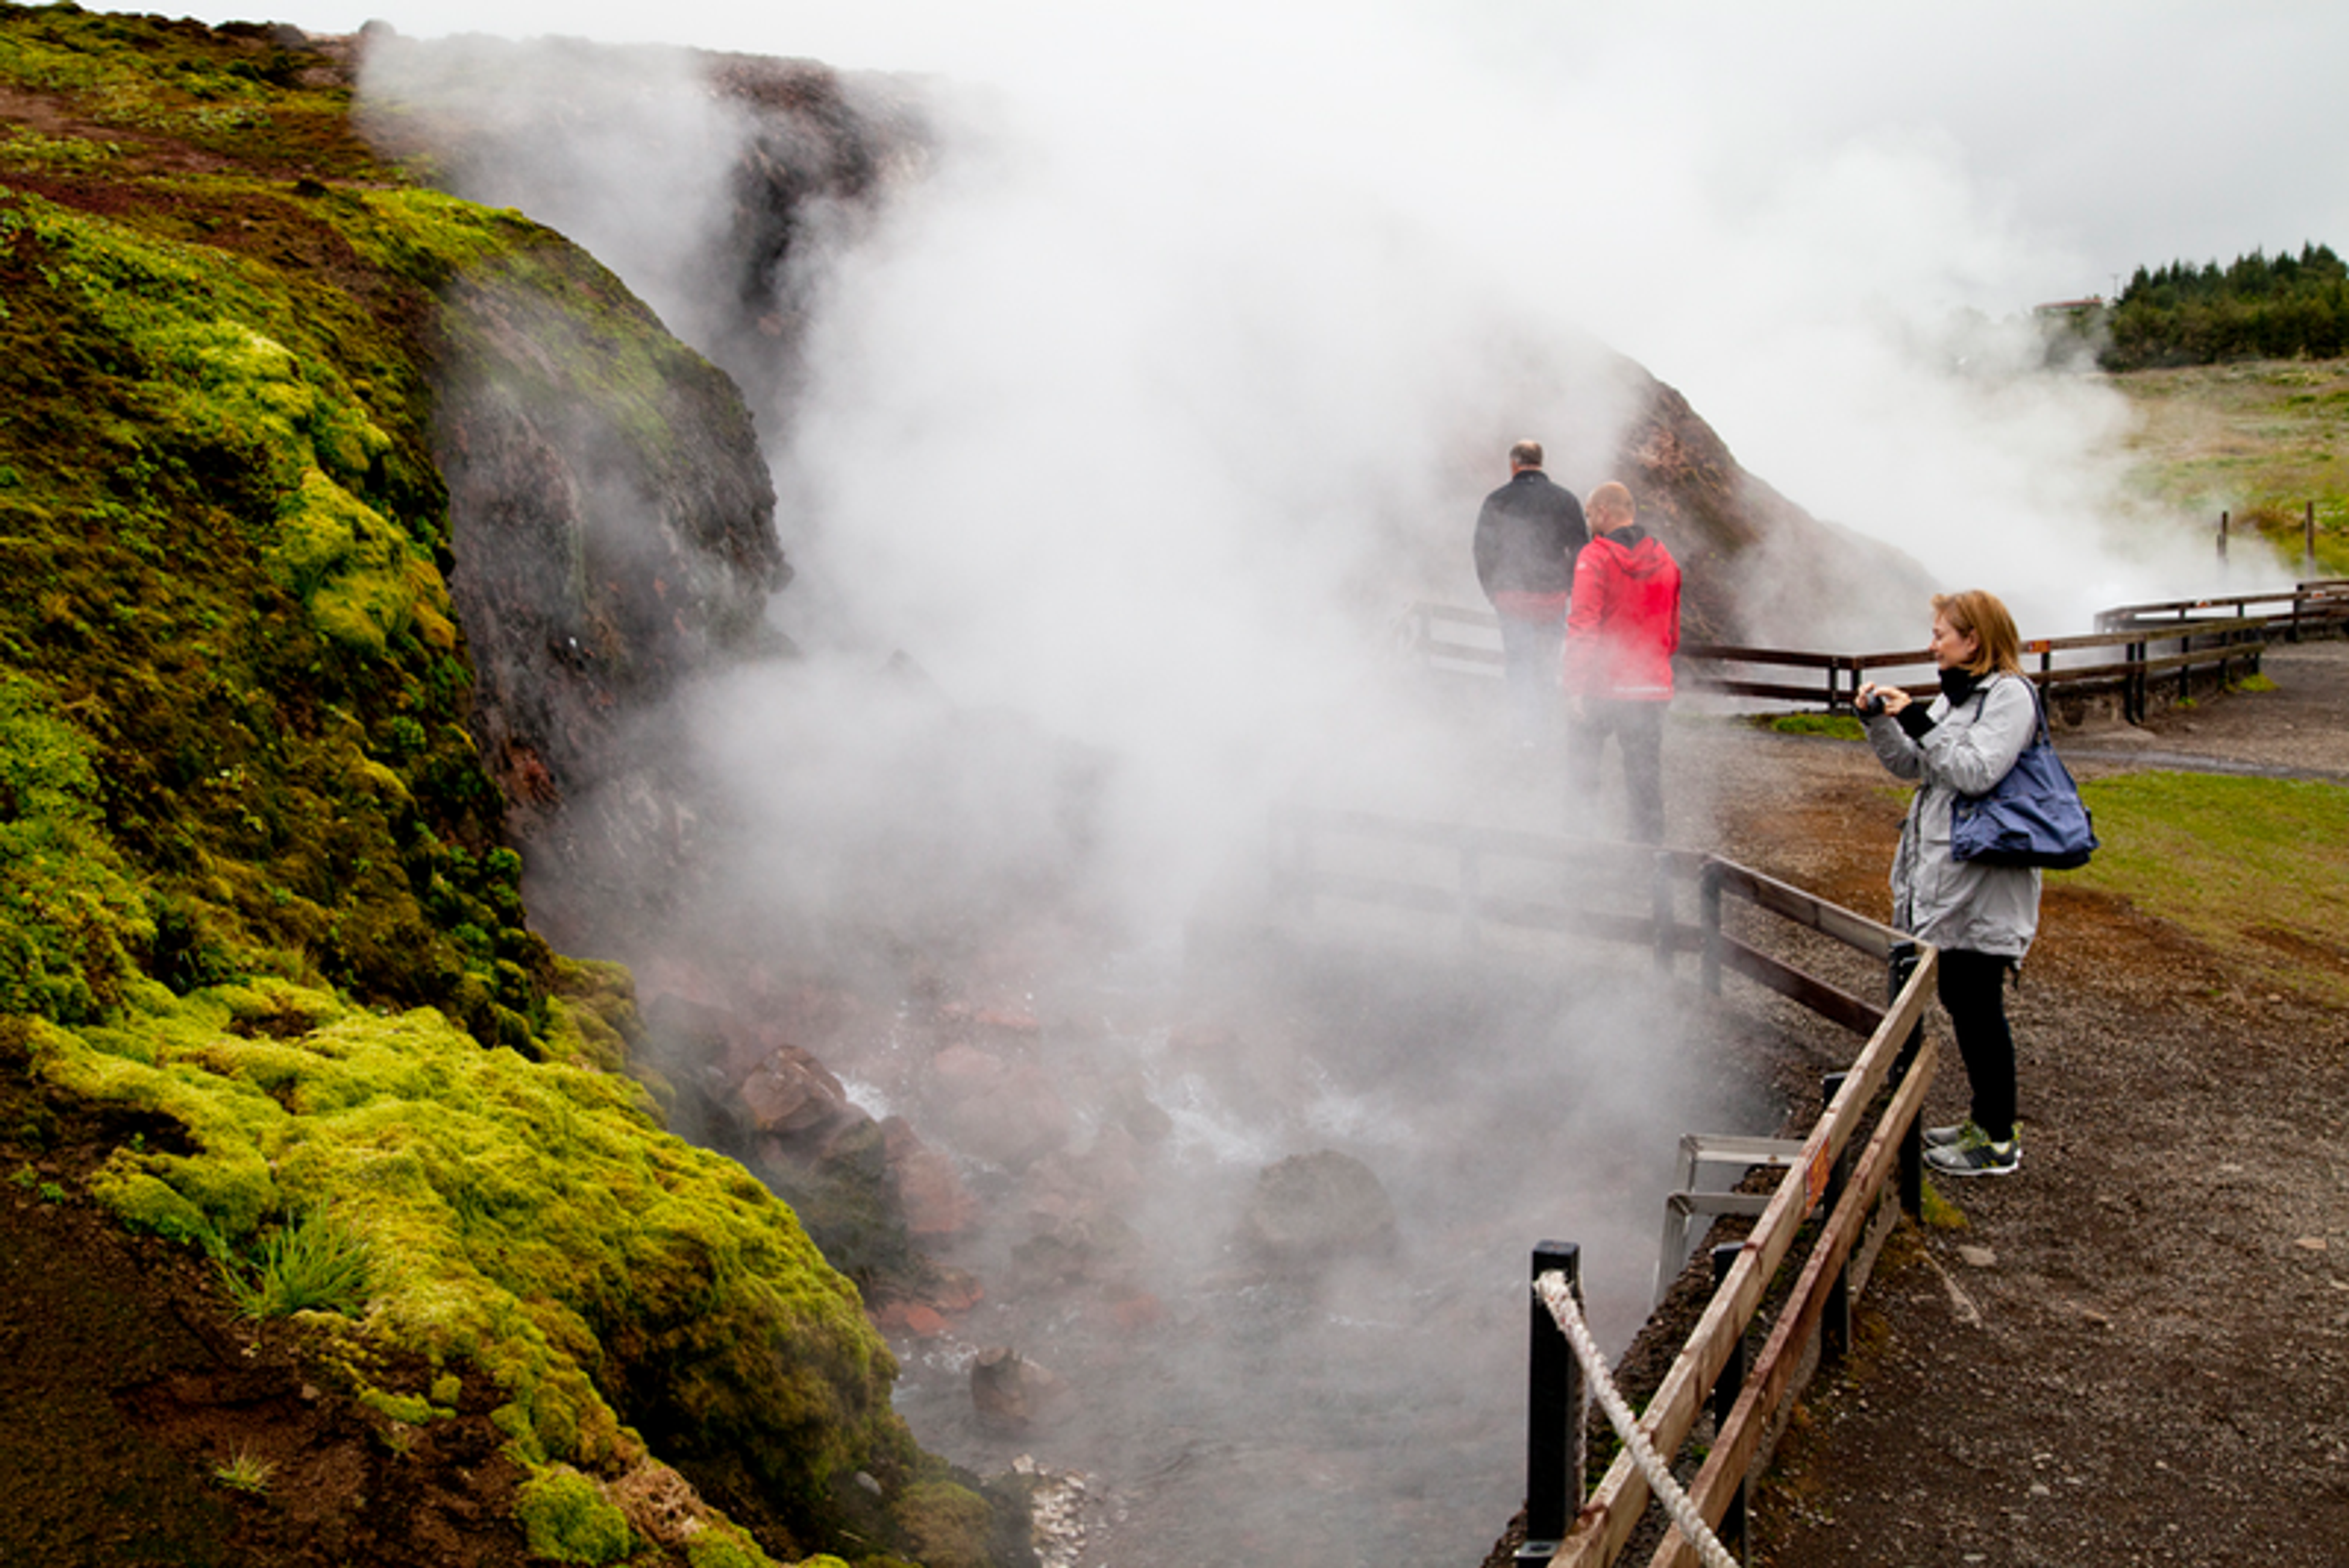 group of people taking a picture of a hot spring.